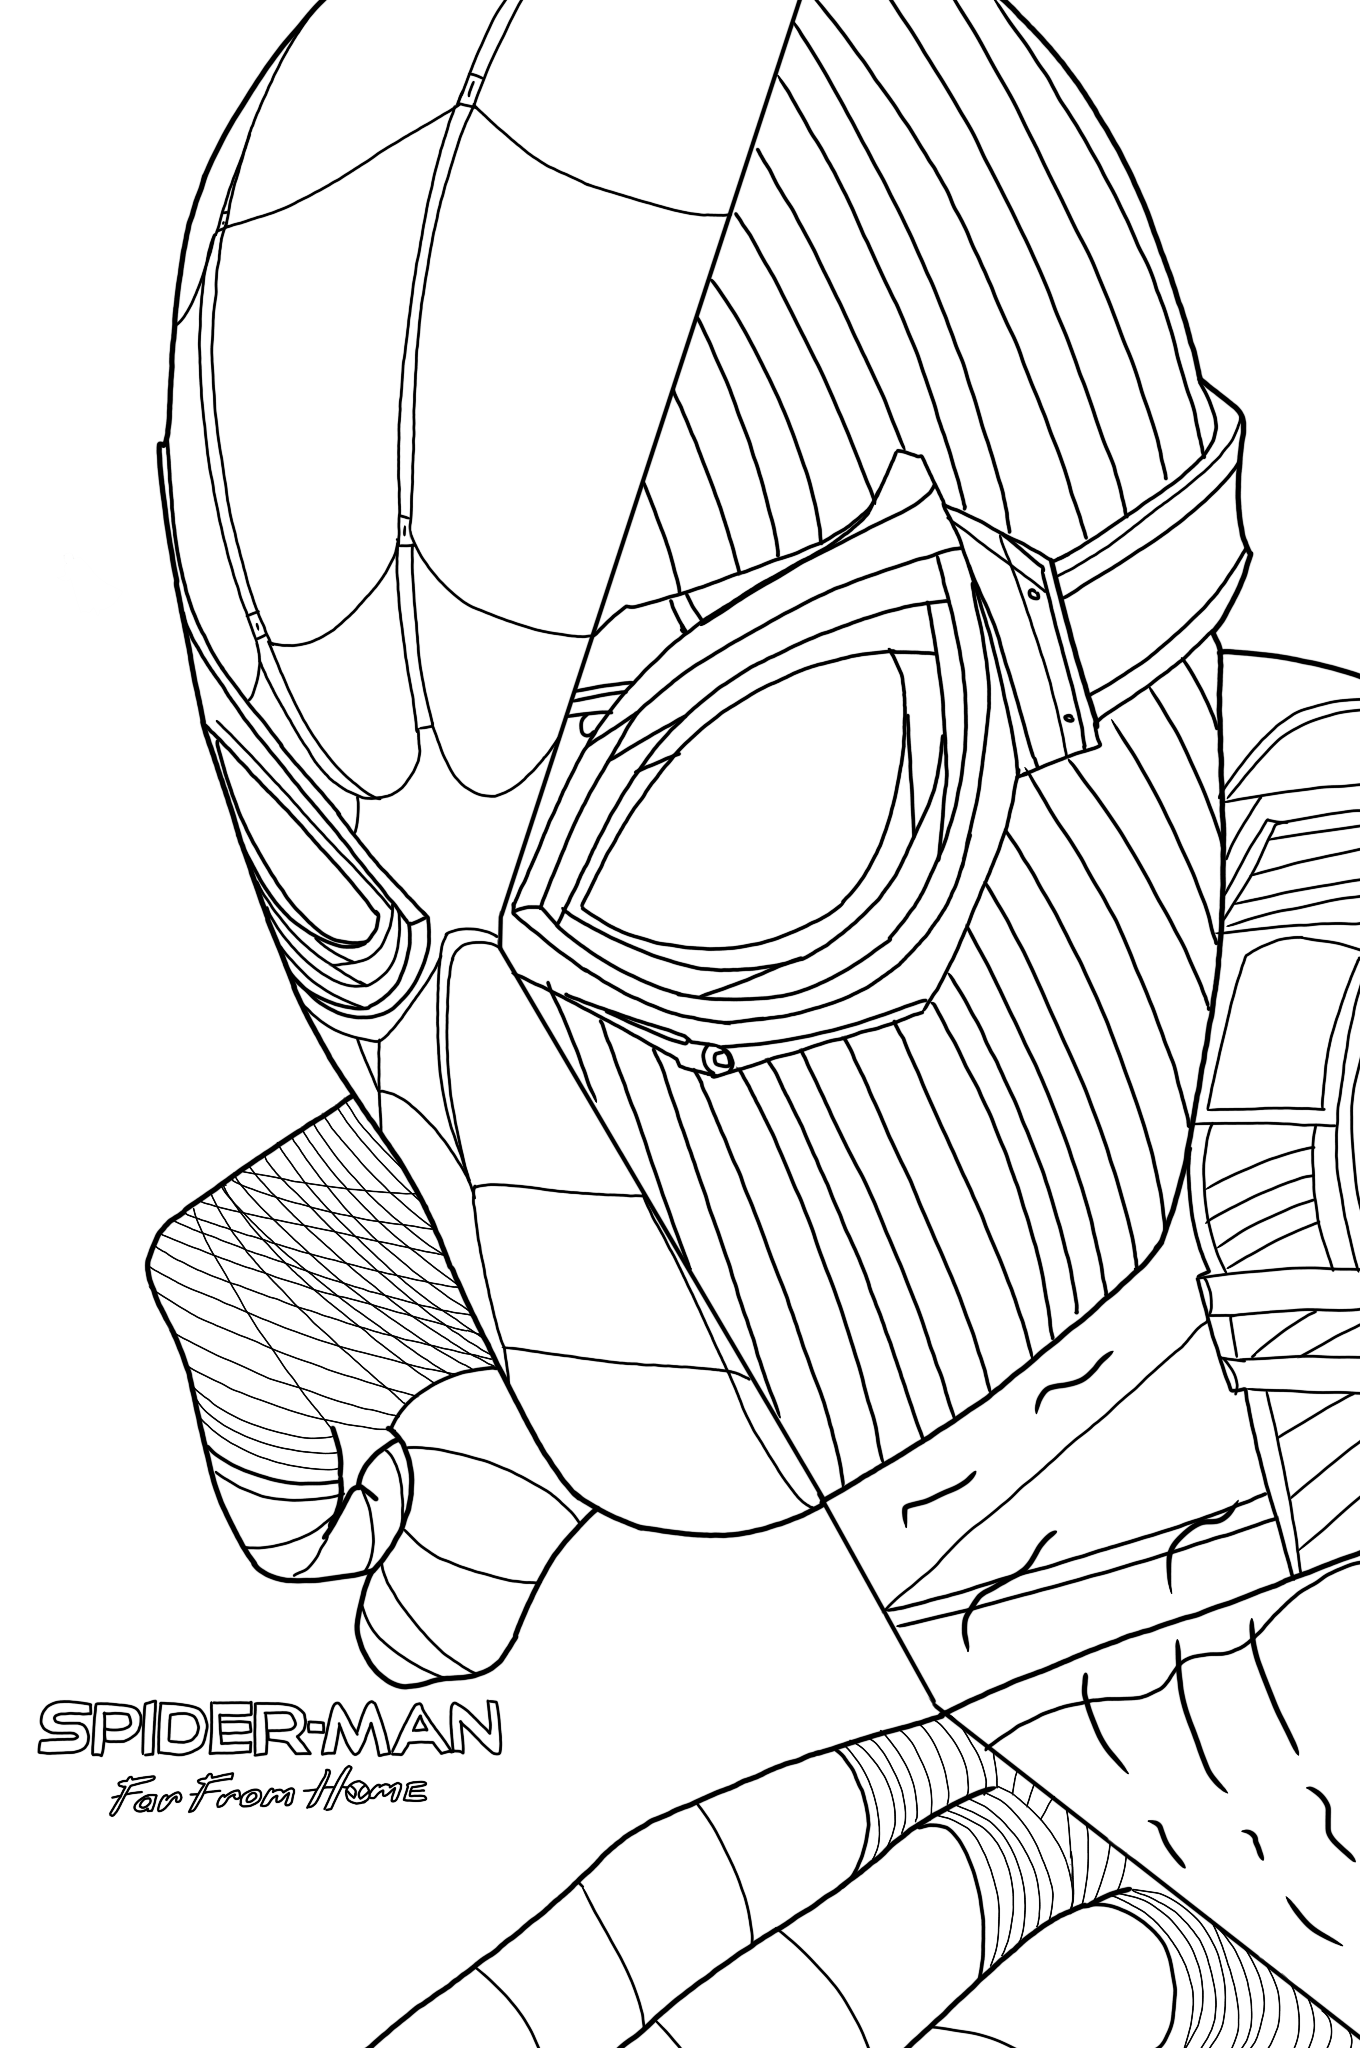 Spider Man | Superhero Coloring Pages